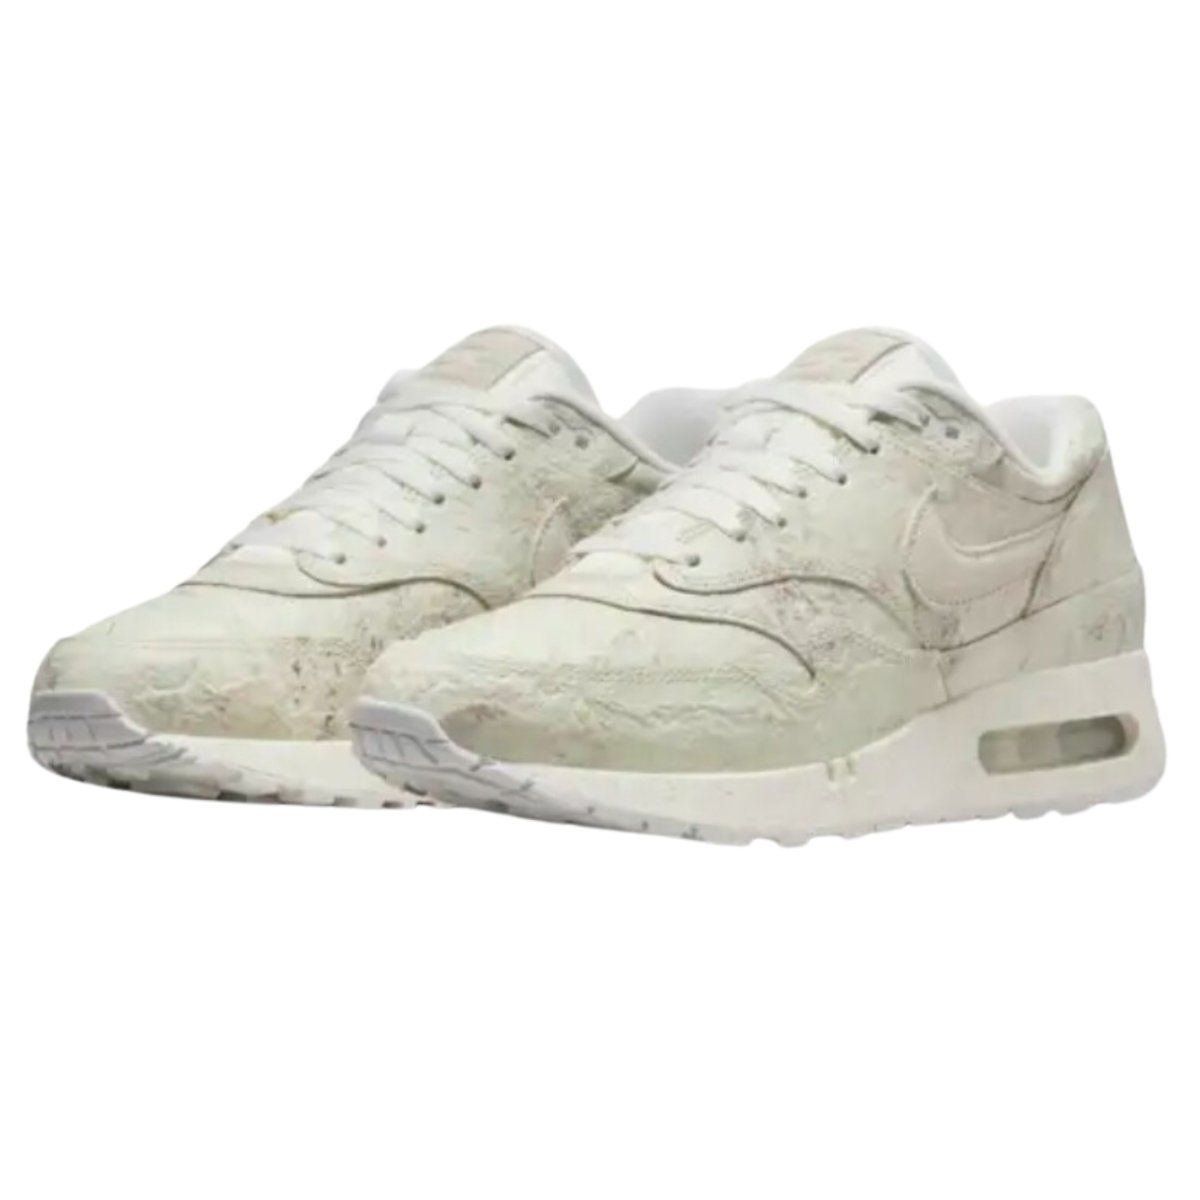 Nike Men's Air Max 1 '86 OG Museum Masterpiece - 5021185 - West NYC